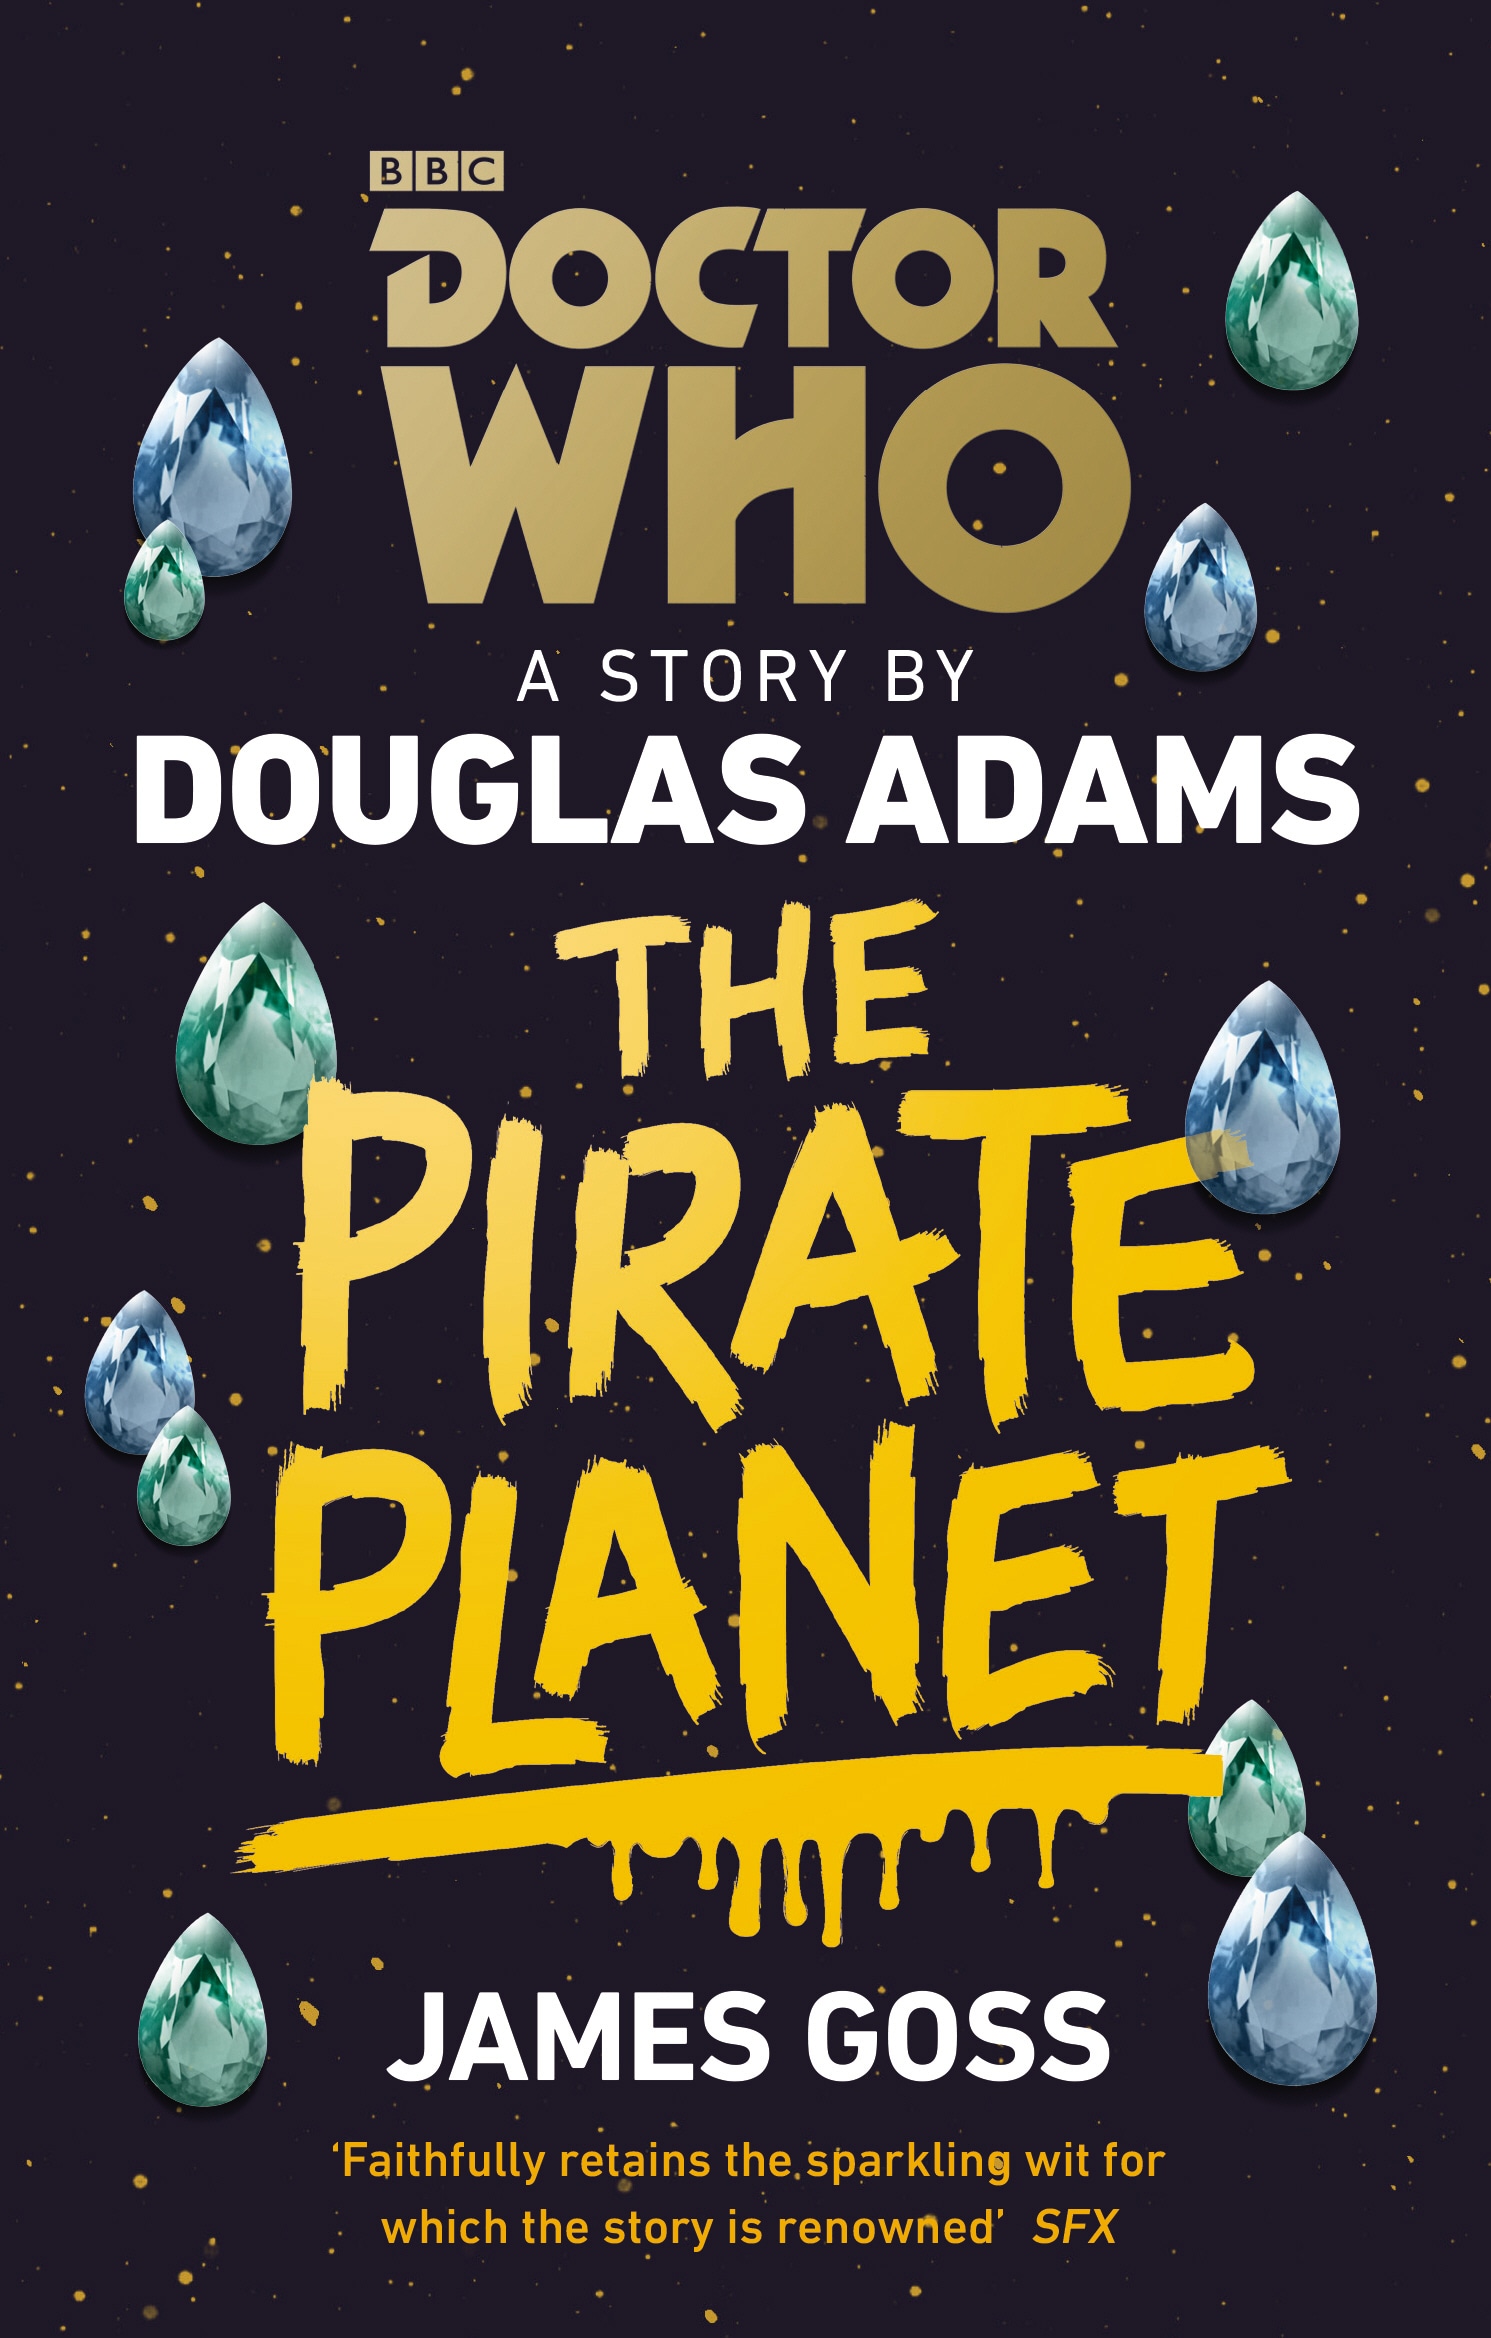 Book “Doctor Who: The Pirate Planet” by Douglas Adams, James Goss — February 1, 2018